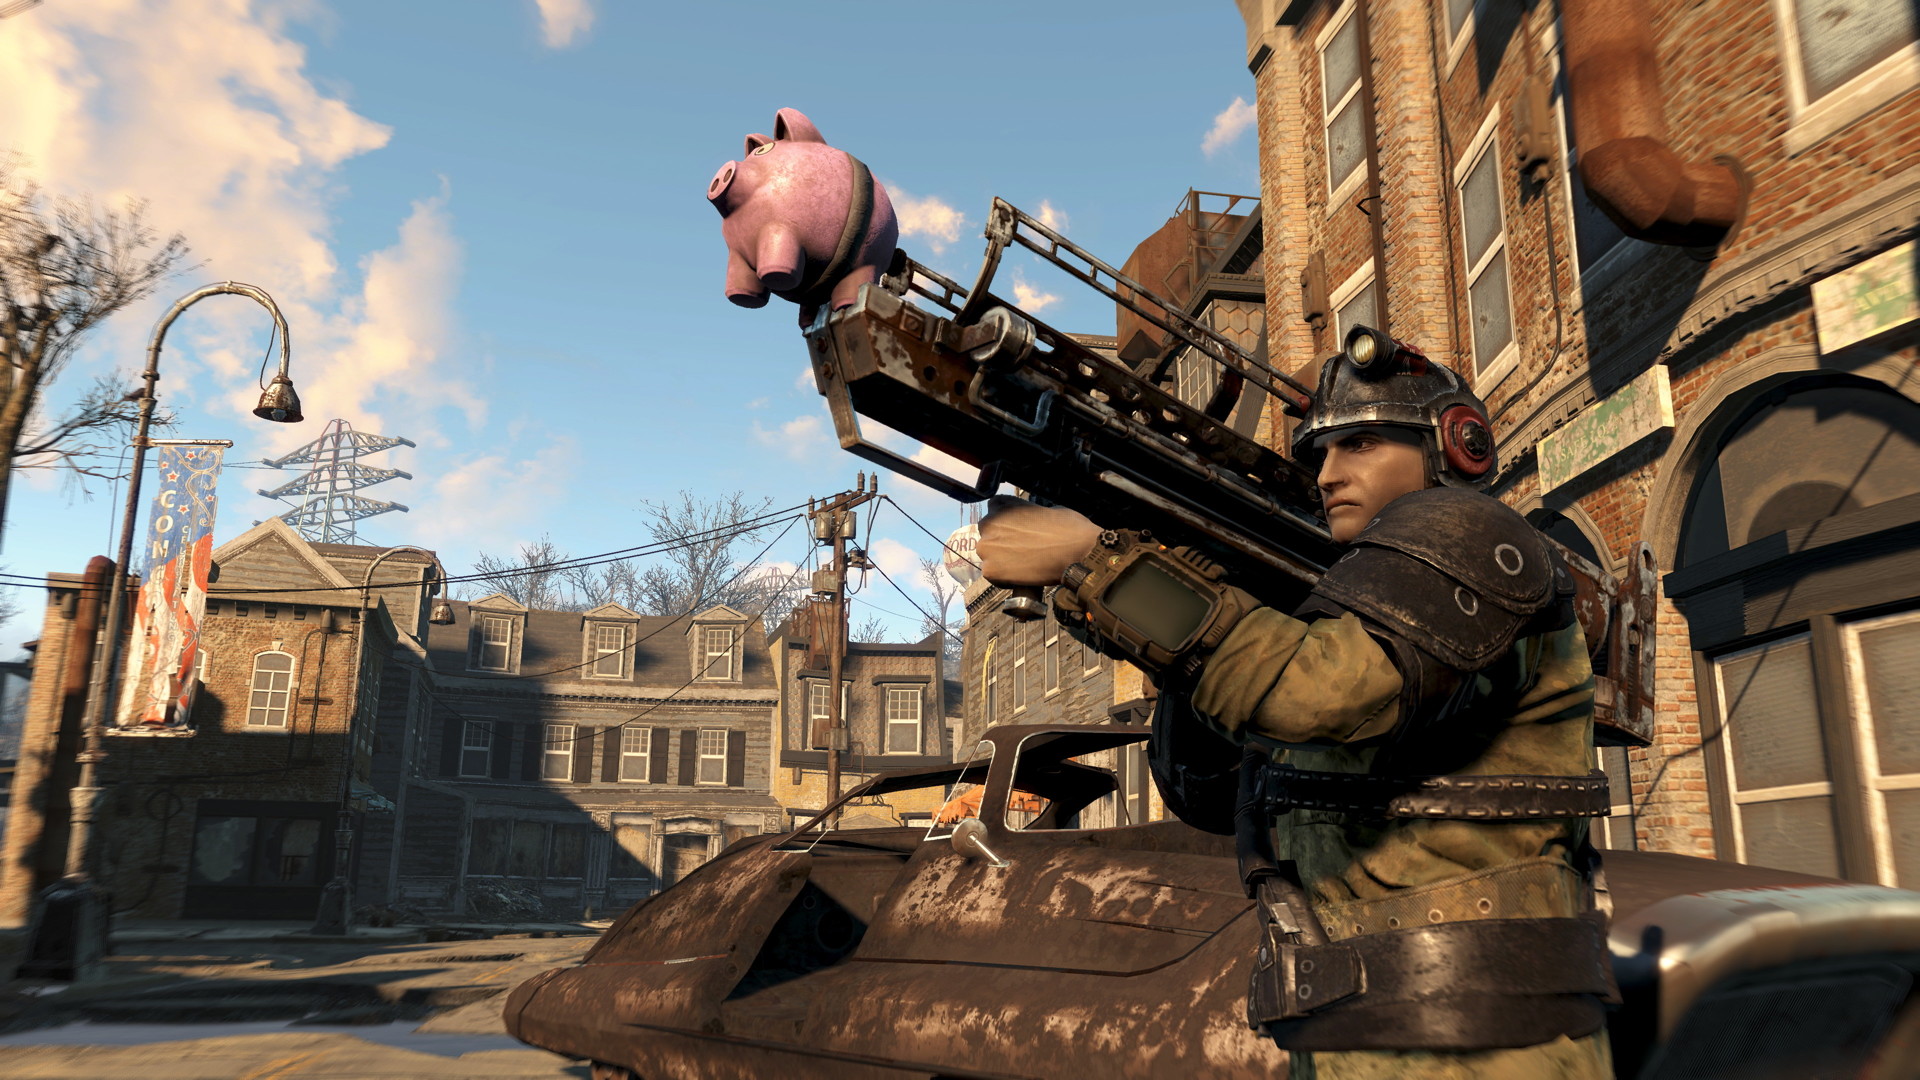 A Fallout 4 character raises an improvised weapon that looks like a rocket launcher and whose payload is a piggy bank.